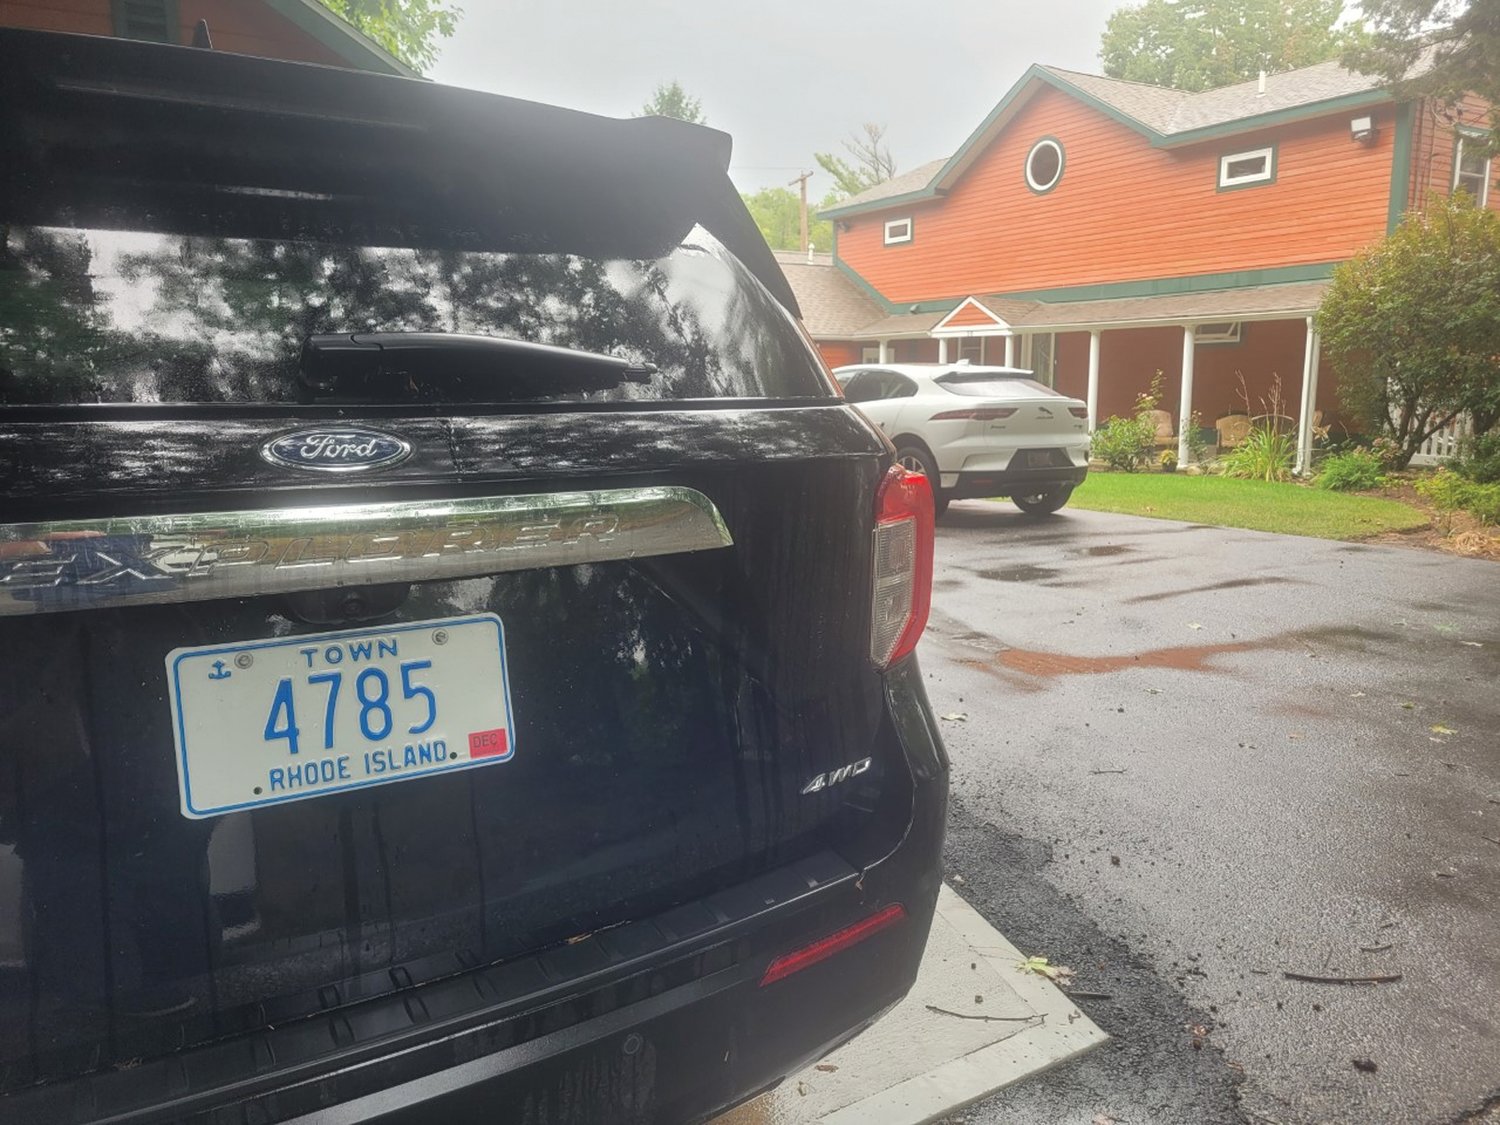 TOWN EMPLOYEE/SENATOR PARKING: A black, four-wheel drive Ford Explorer with a blue and white town license plate sat outside Lombardo’s home at 10 Anson Brown — a small dead-end waterfront street. Next to the Explorer, Lombardo parked his white Jaguar Pace SUV, with “SENATE” license plates.